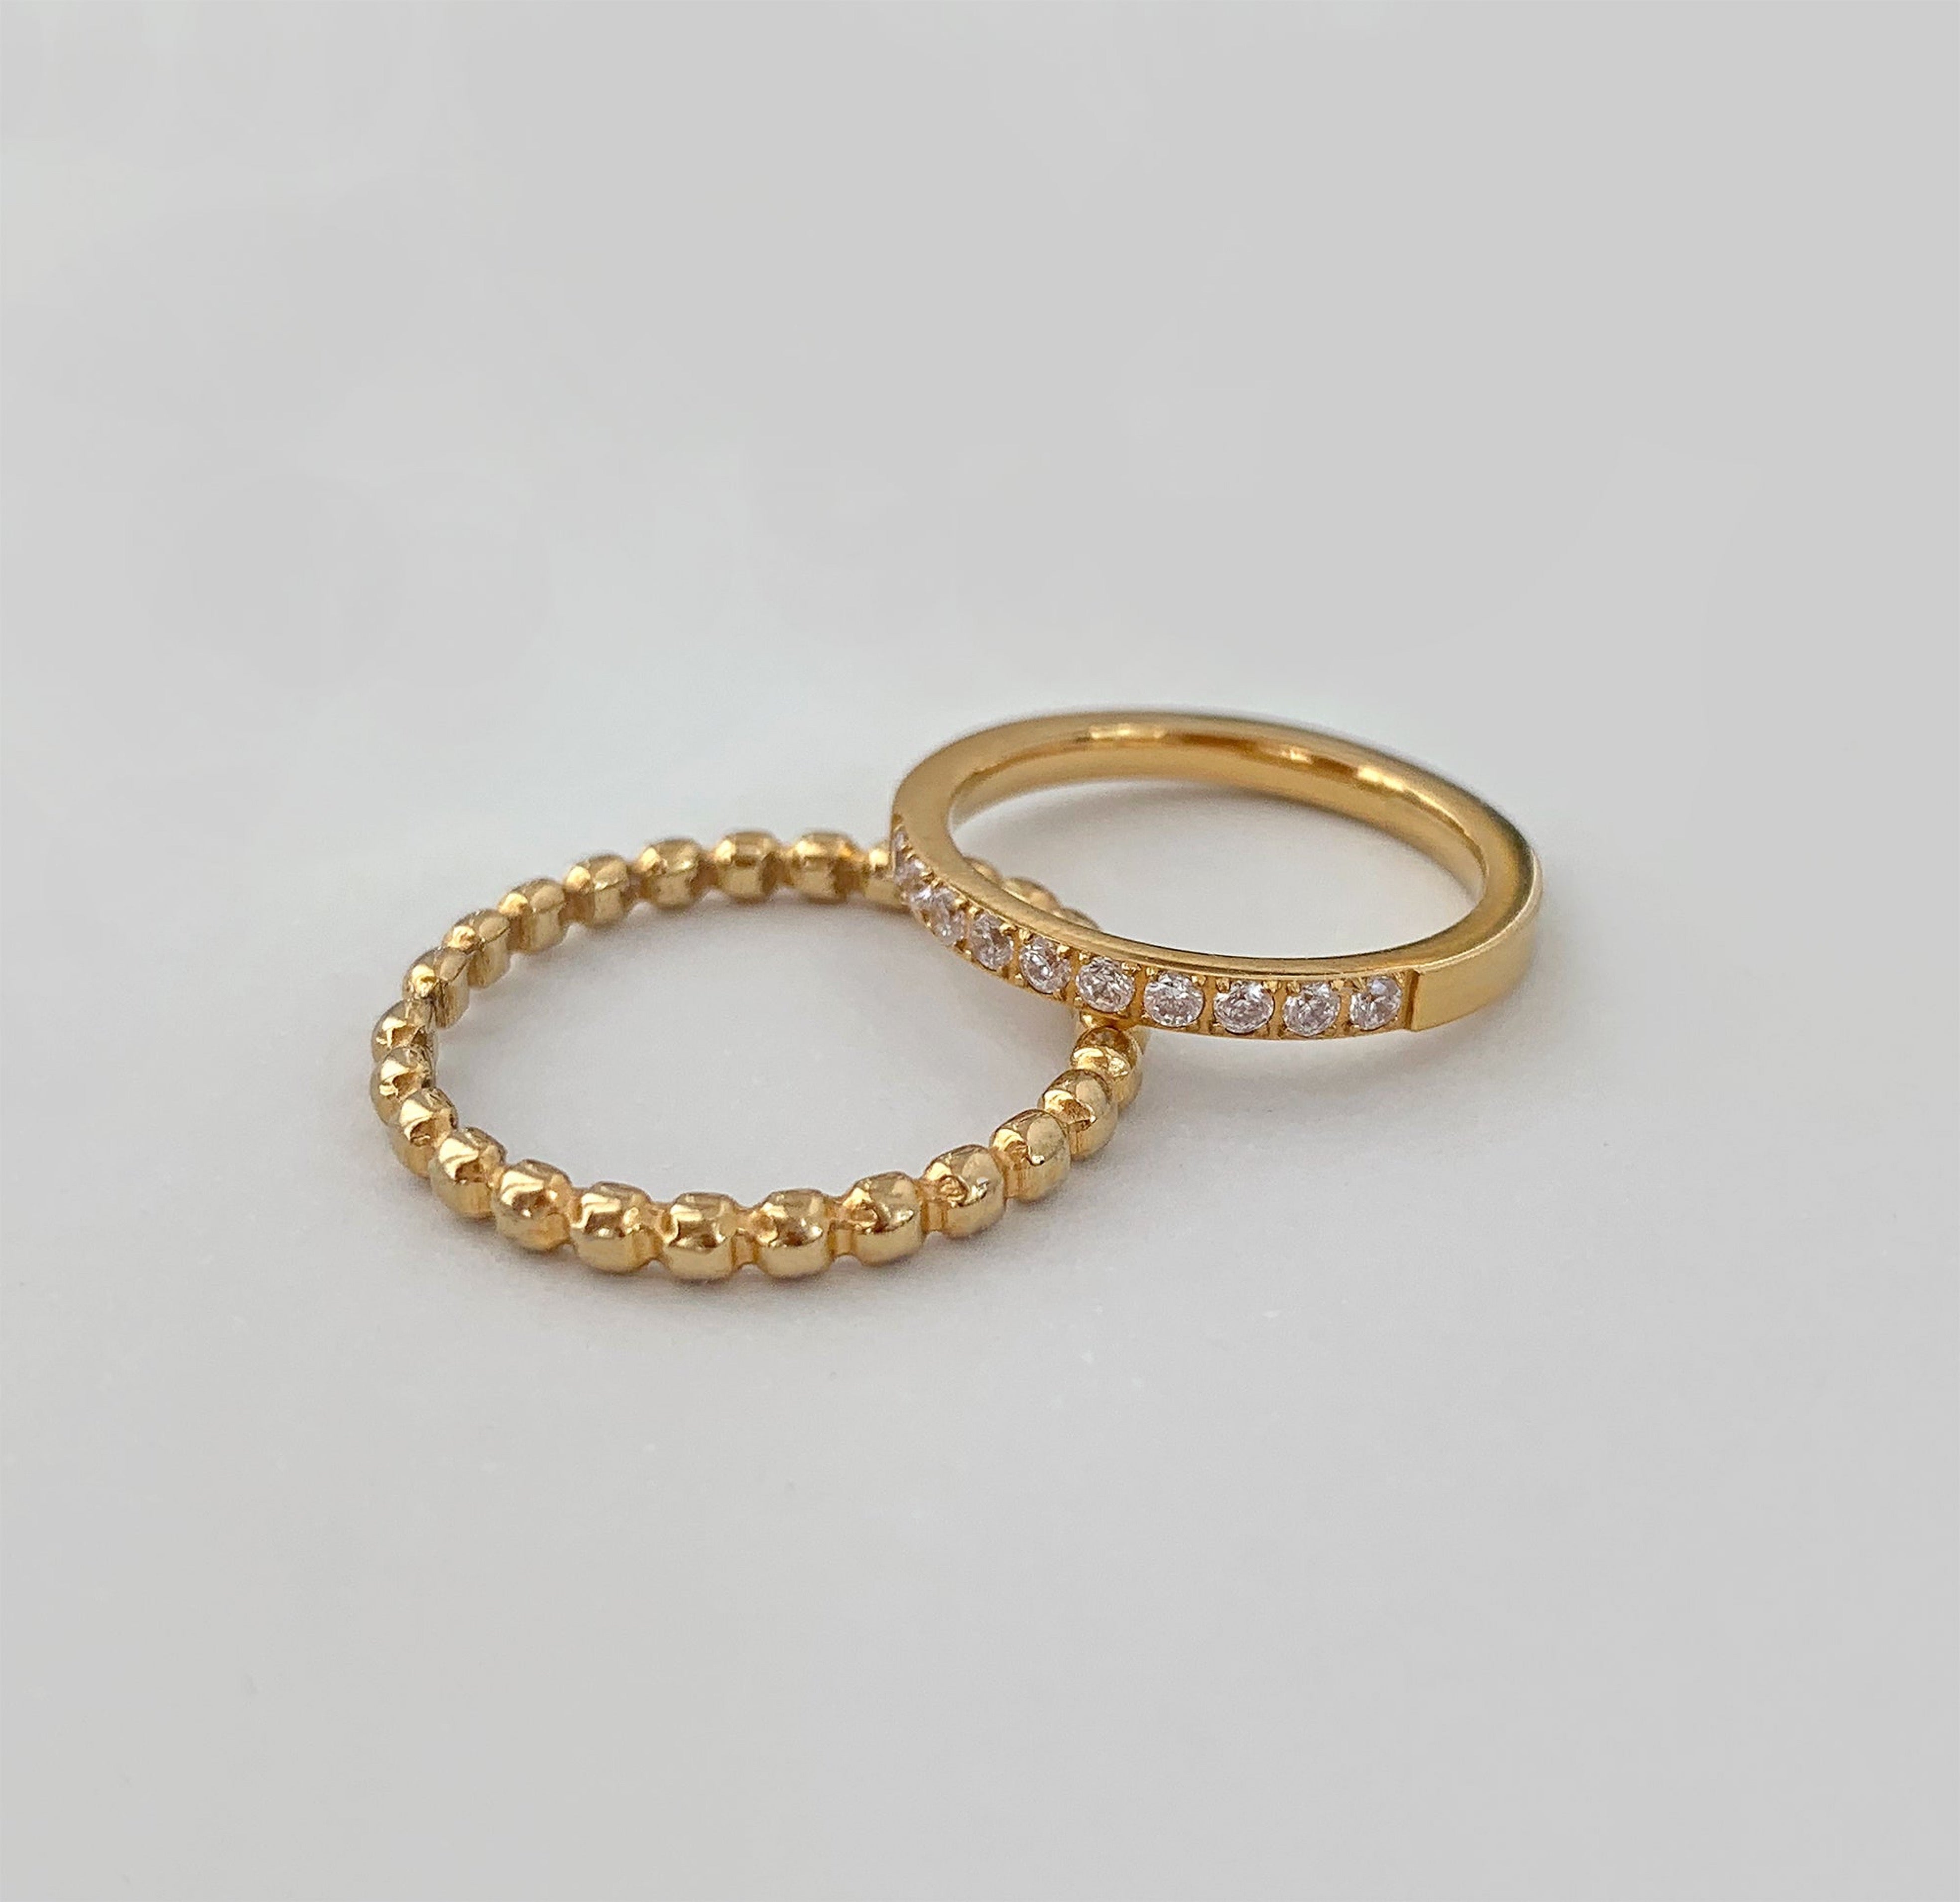 Stella gold hald eternity ring band  paired with jaina gold beaded ring, gold waterproof jewelry